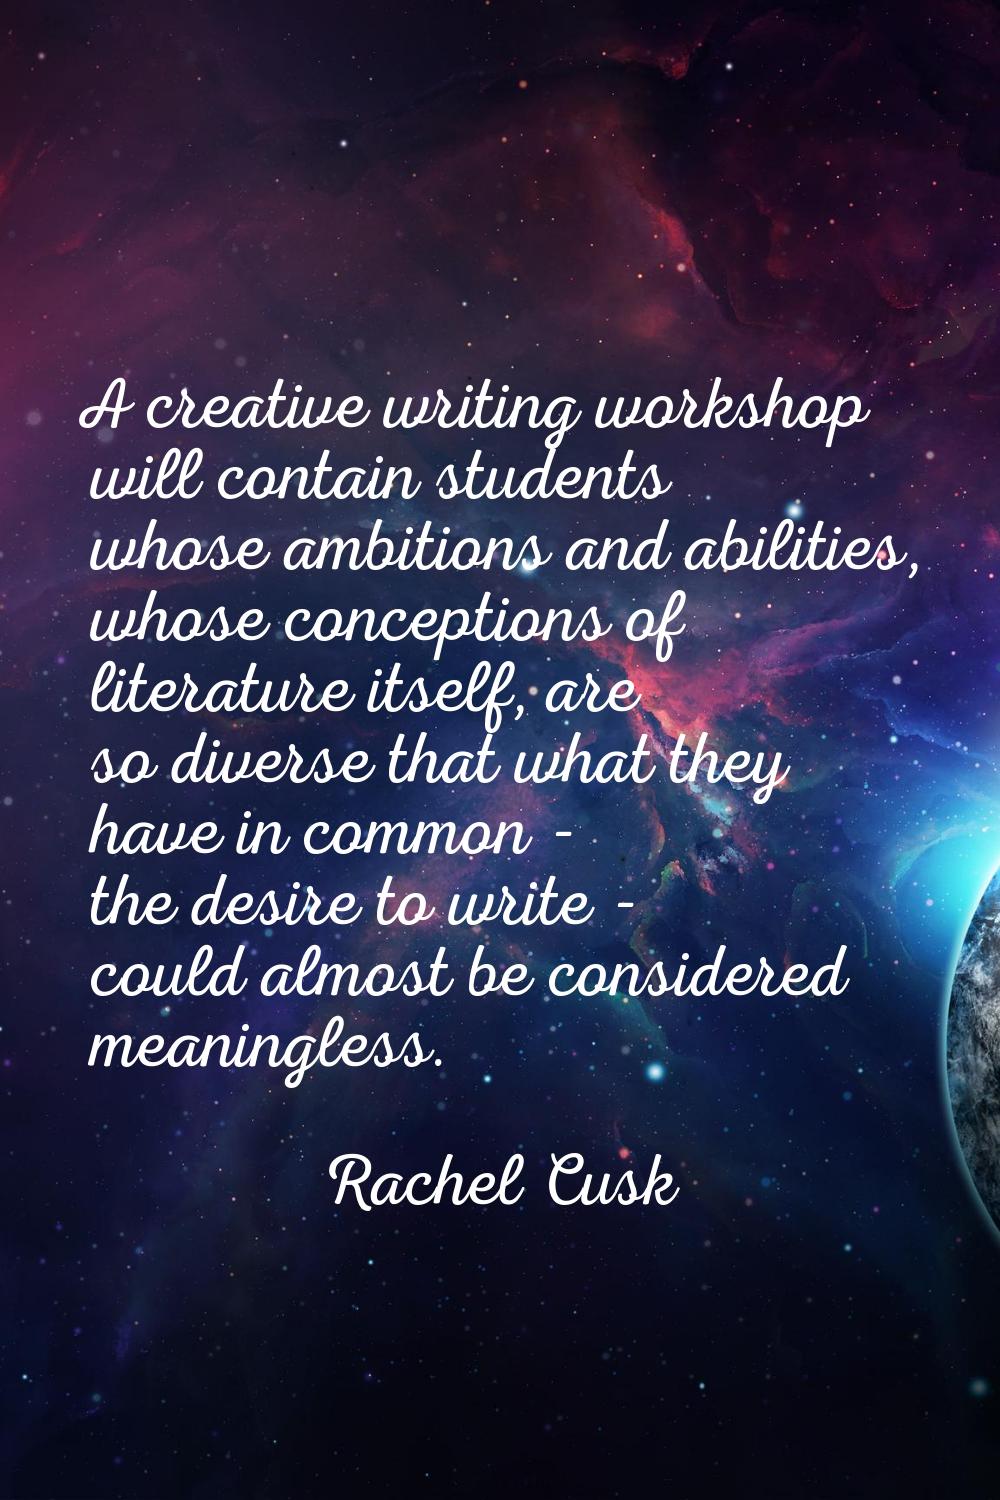 A creative writing workshop will contain students whose ambitions and abilities, whose conceptions 